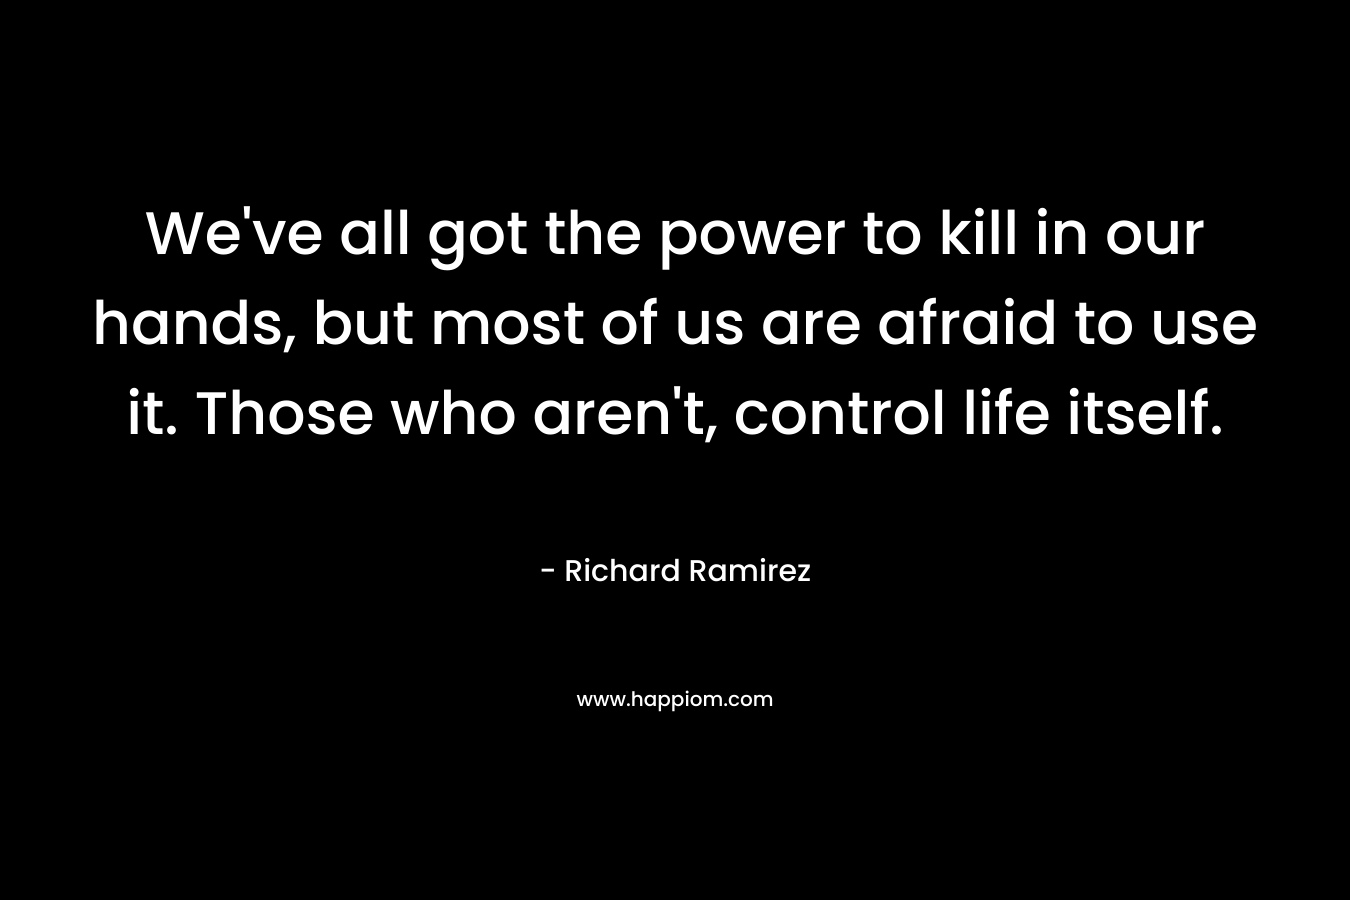 We've all got the power to kill in our hands, but most of us are afraid to use it. Those who aren't, control life itself.